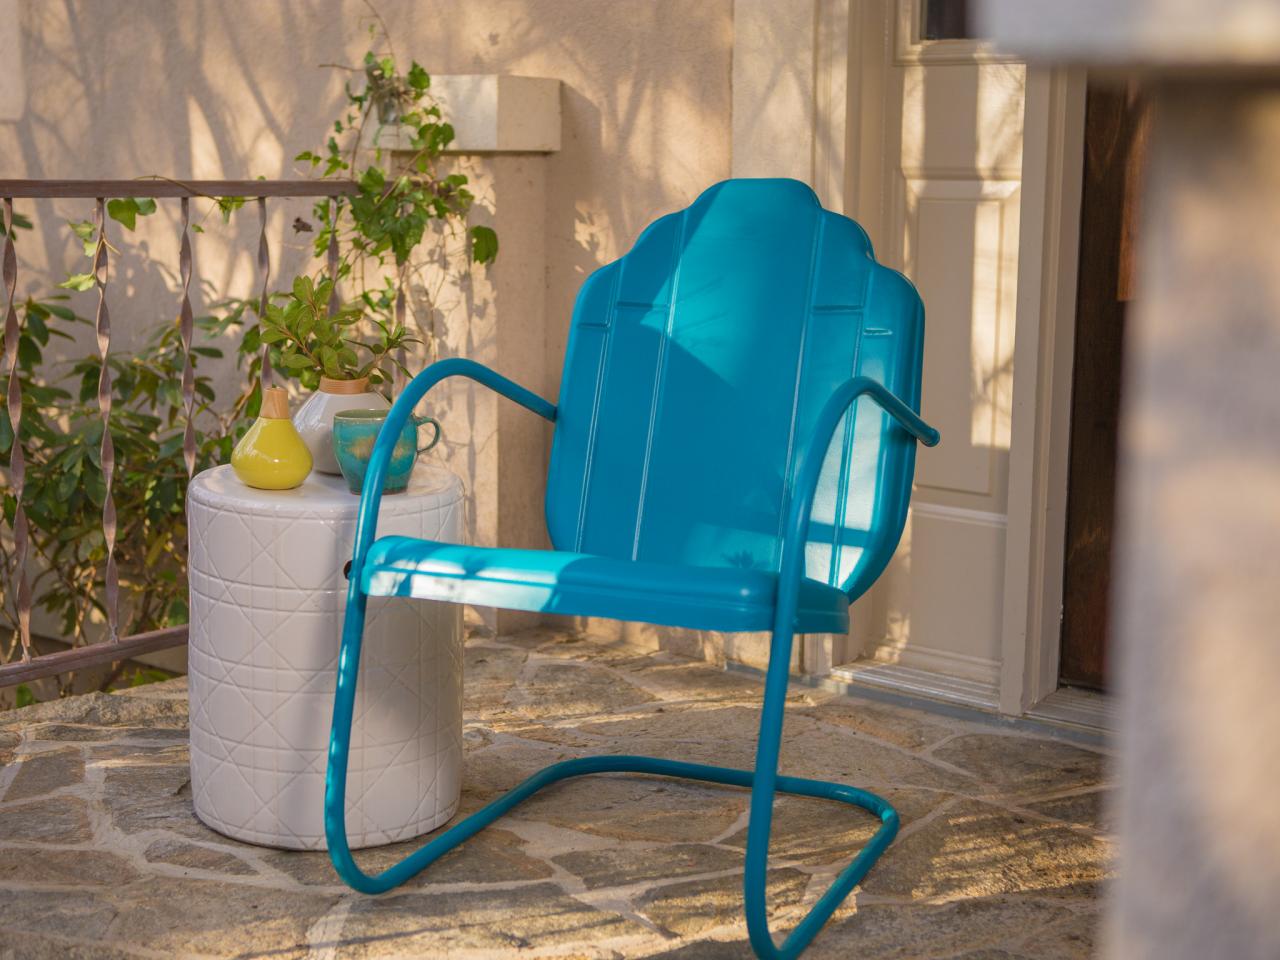 How To Paint An Outdoor Metal Chair, Best Way To Paint Outdoor Aluminum Furniture